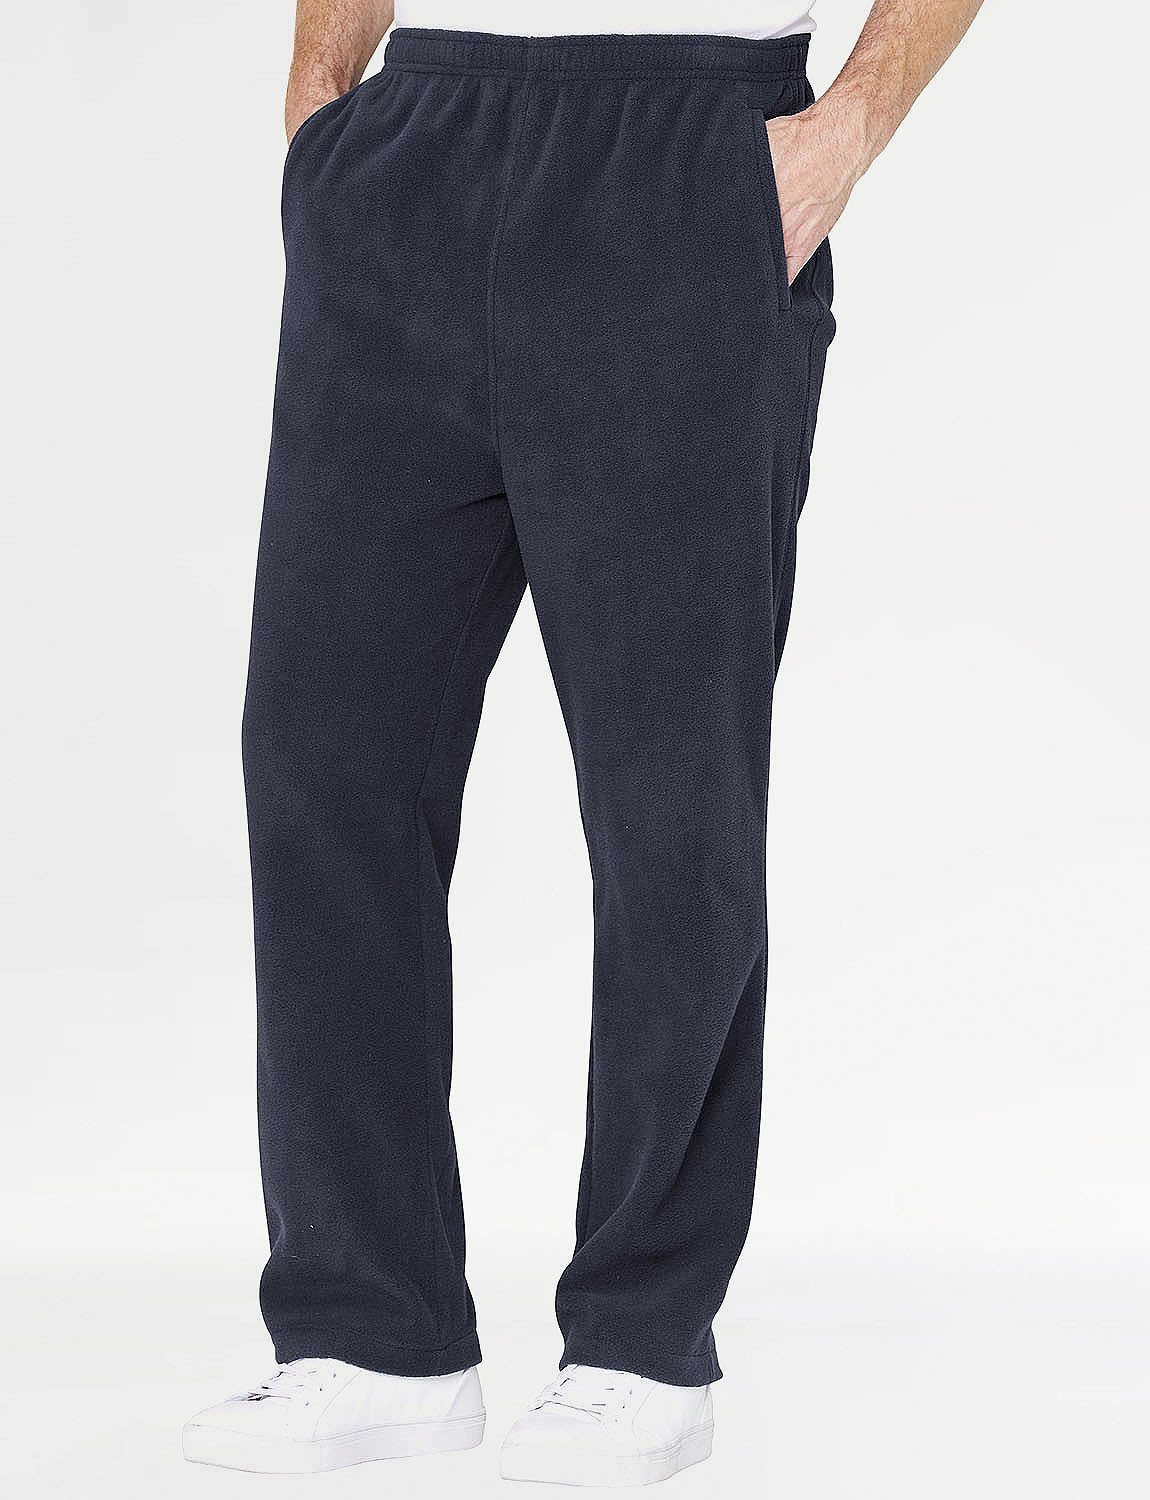 Thermal Fleece Pull On Leisure Trouser | Chums